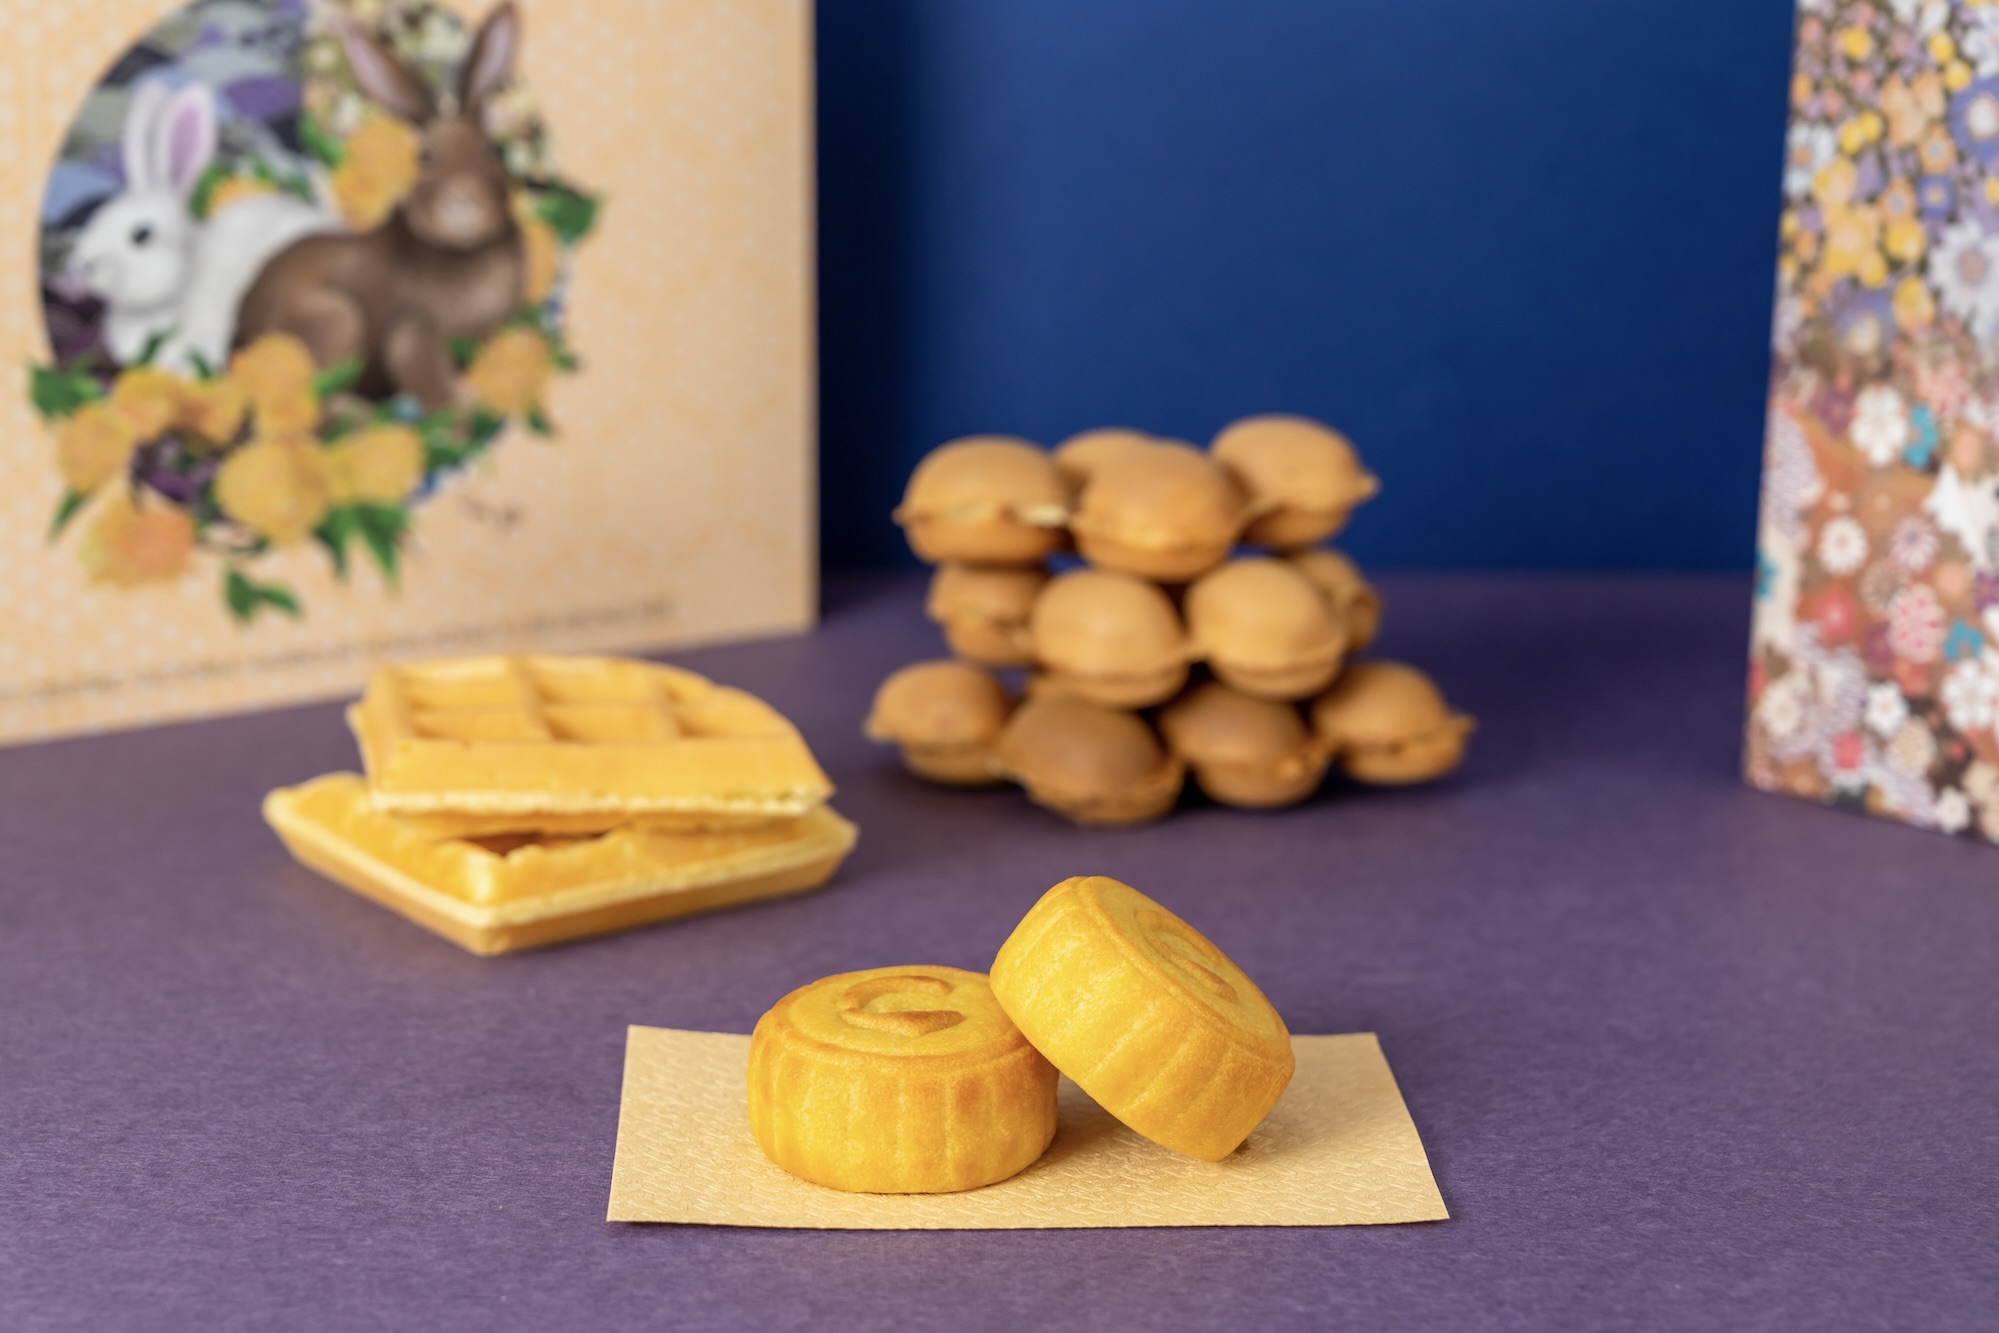 Two whole mooncakes sit placed on top of the other. In the background, there is a traditional waffle and a bubble waffle, as well as a box with rabbits.